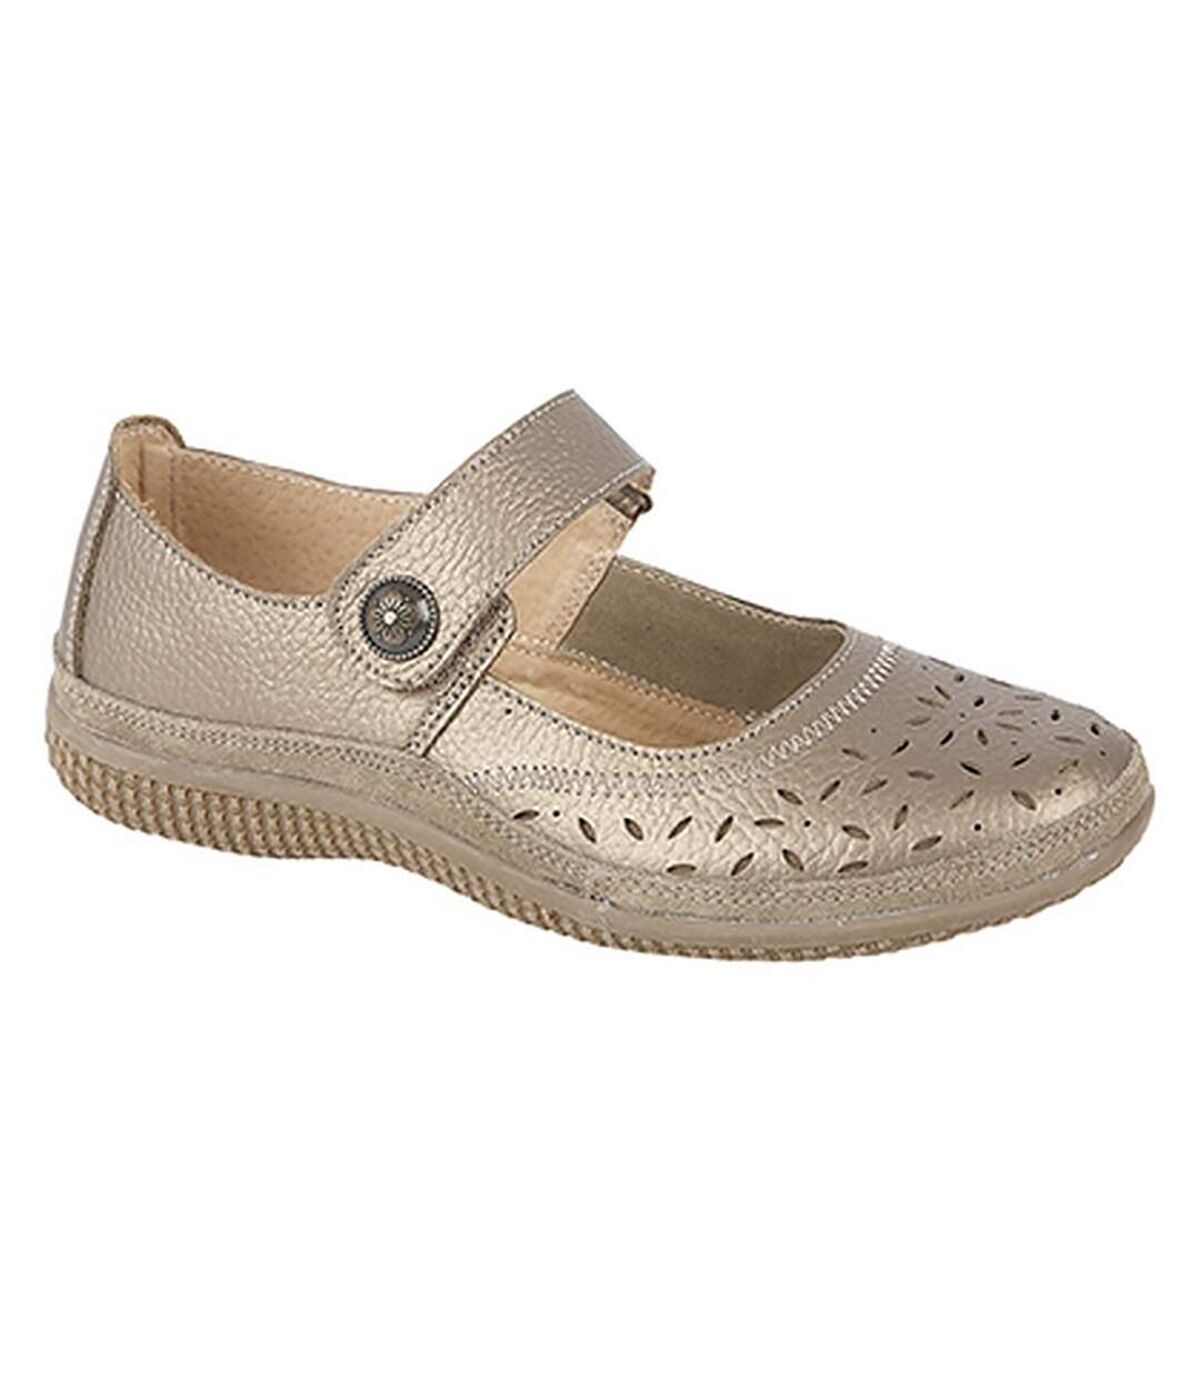 Boulevard Womens/Ladies Wide Fitting Touch Fastening Perforated Bar Shoes (Bronze) - UTDF419